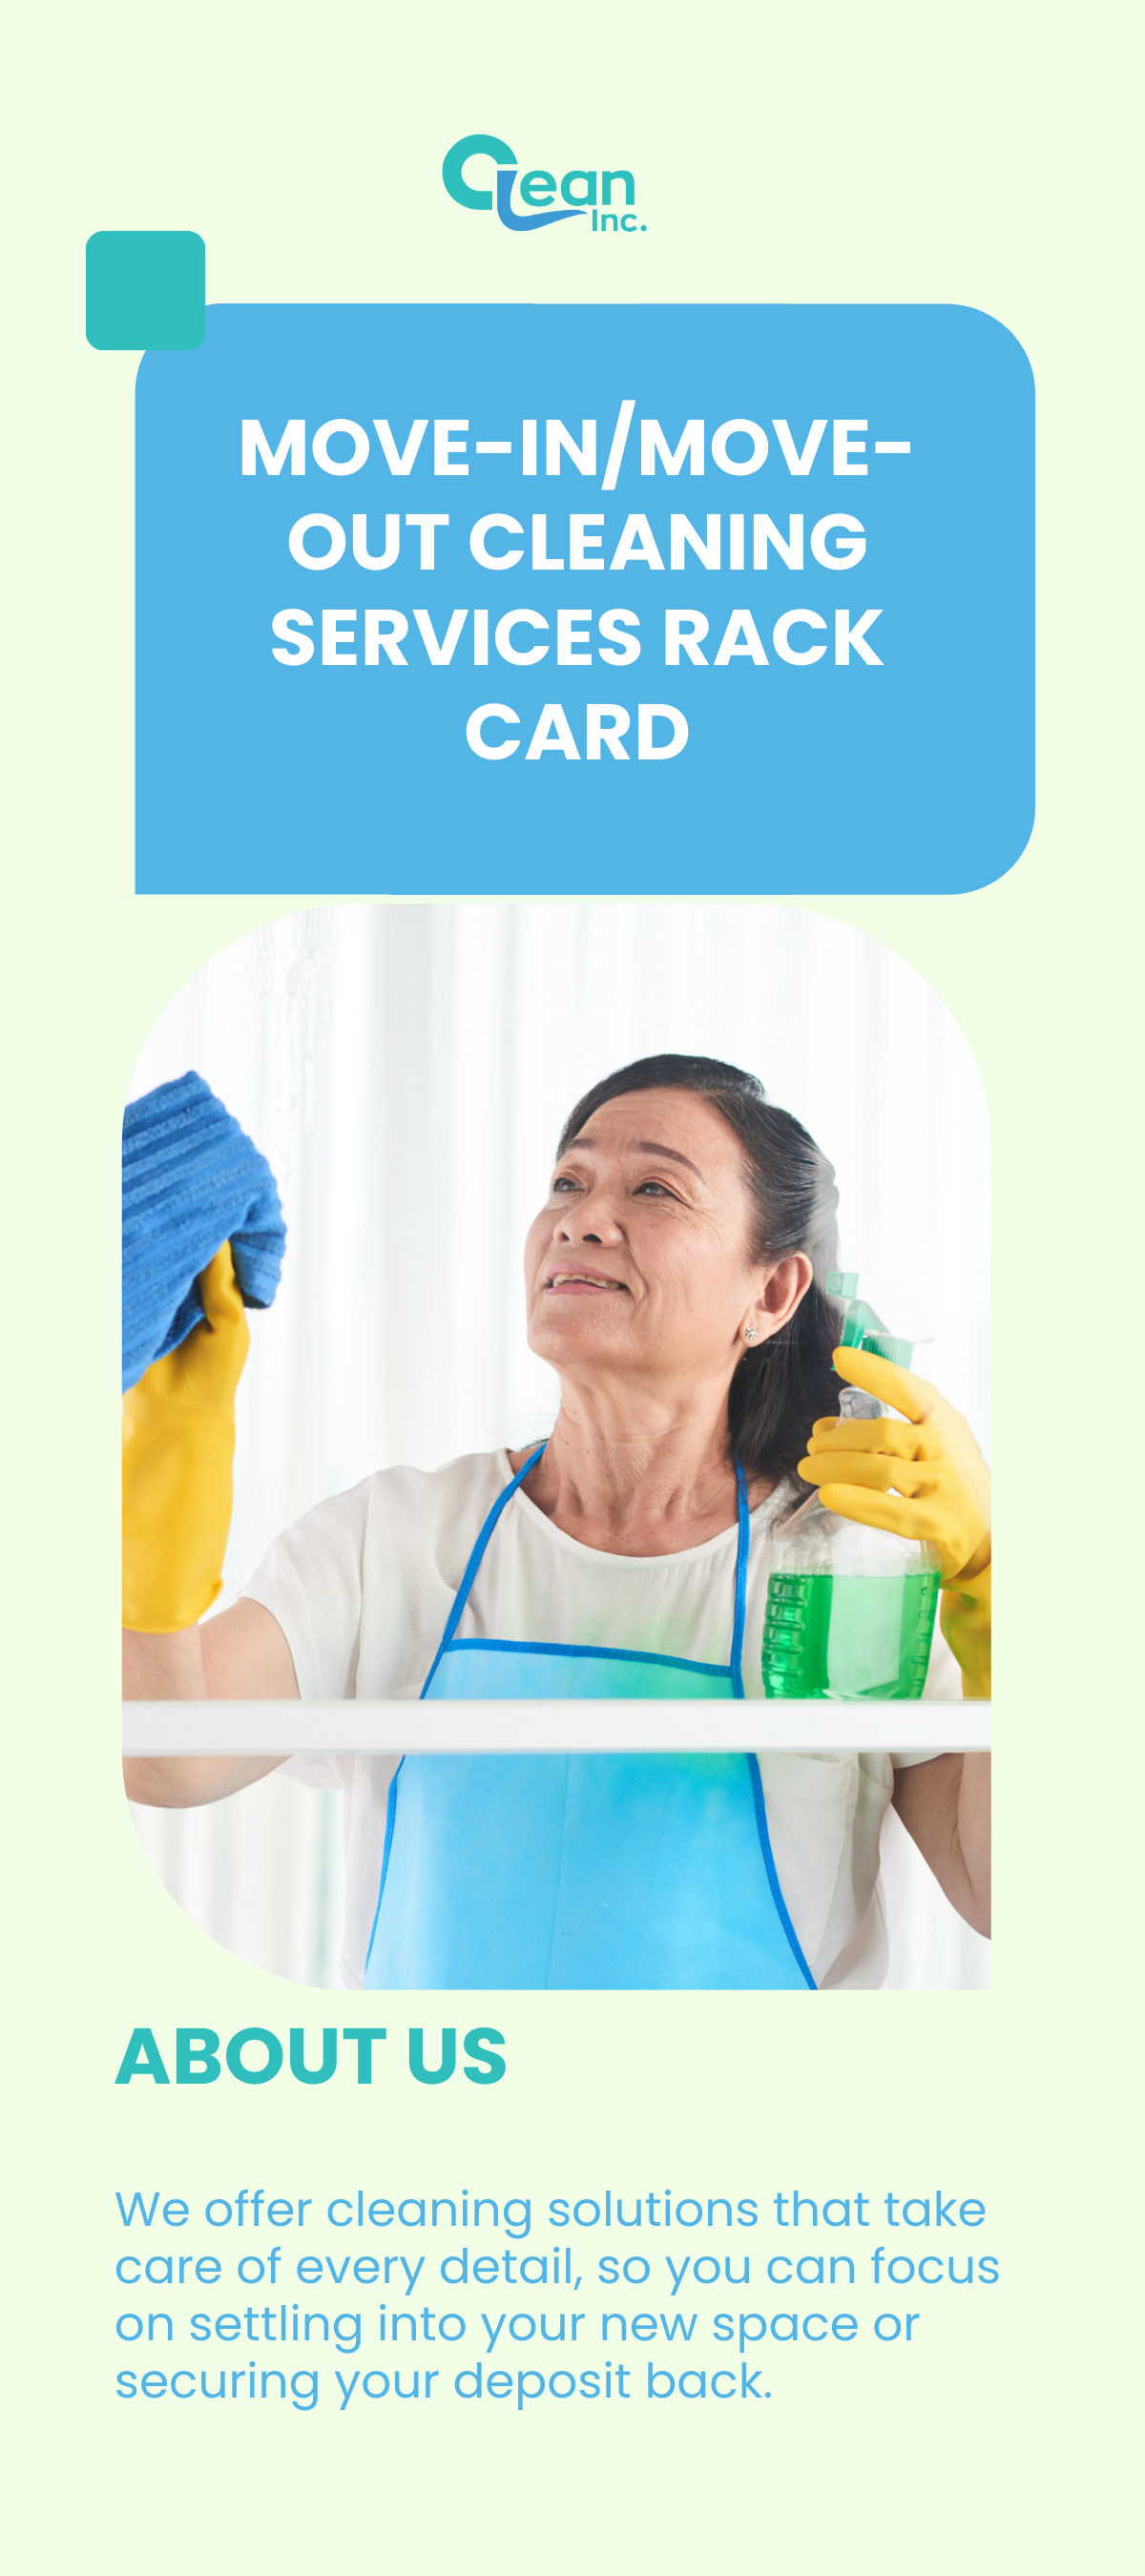 Move-In/Move-Out Cleaning Services Rack Card